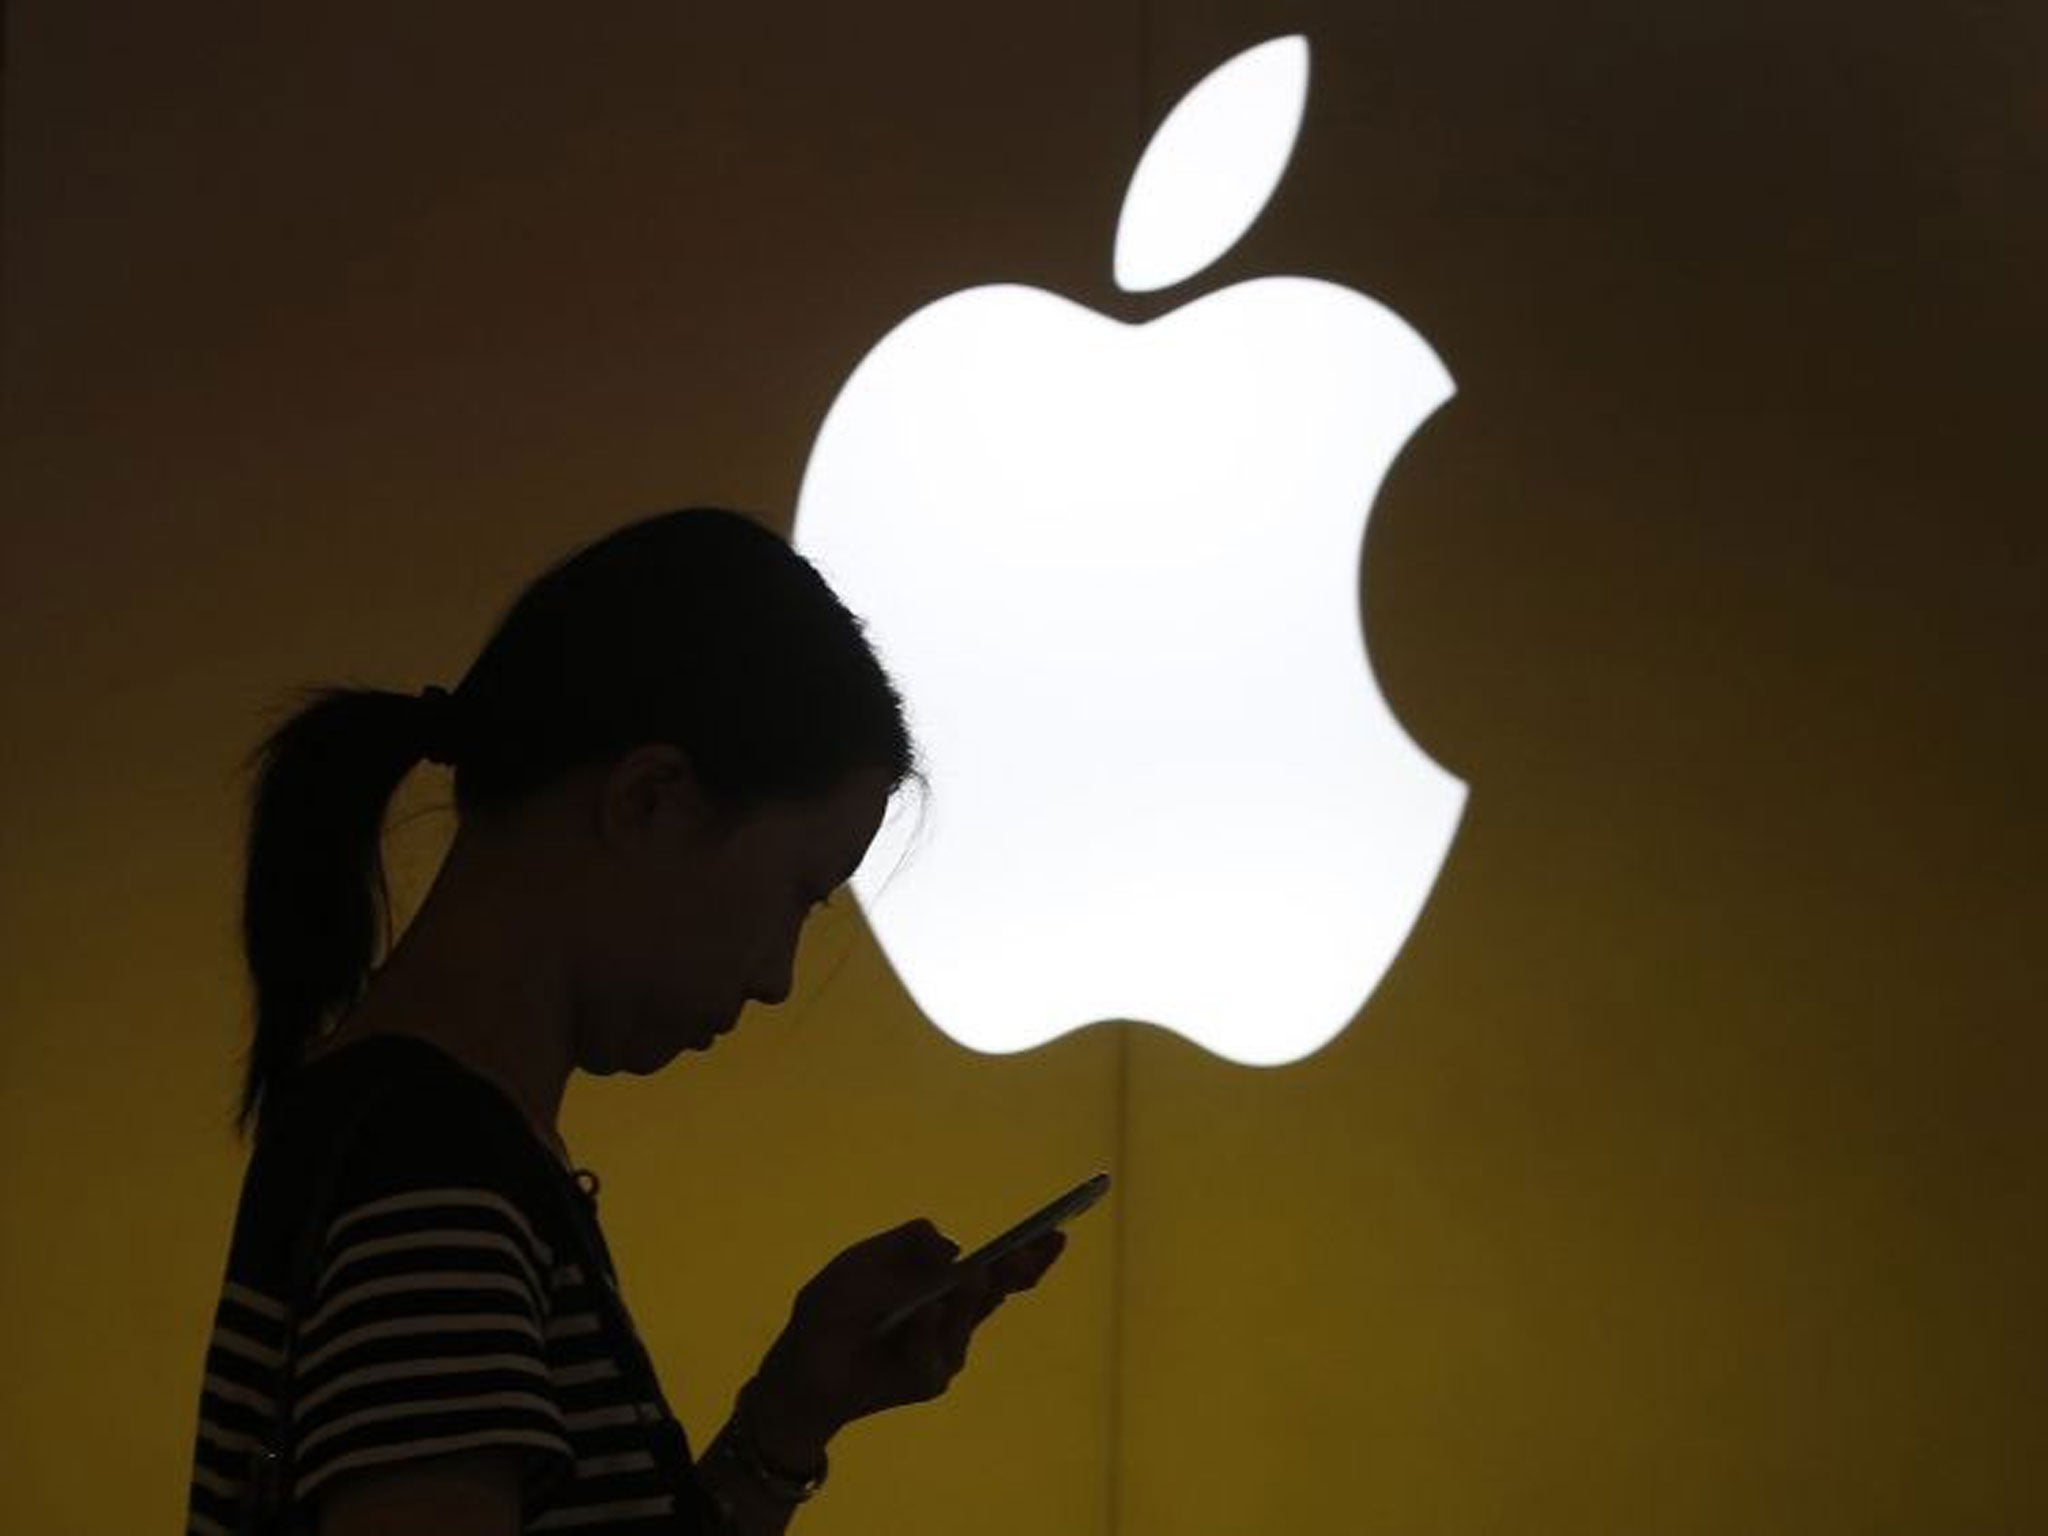 A woman looks at the screen of her mobile phone in front of an Apple logo outside its store in downtown Shanghai September 10, 2013. Apple Inc is expected to introduce a cheaper version of the iPhone on Tuesday, bringing one of the industry's costliest smartphones within reach of the masses in poorer emerging markets